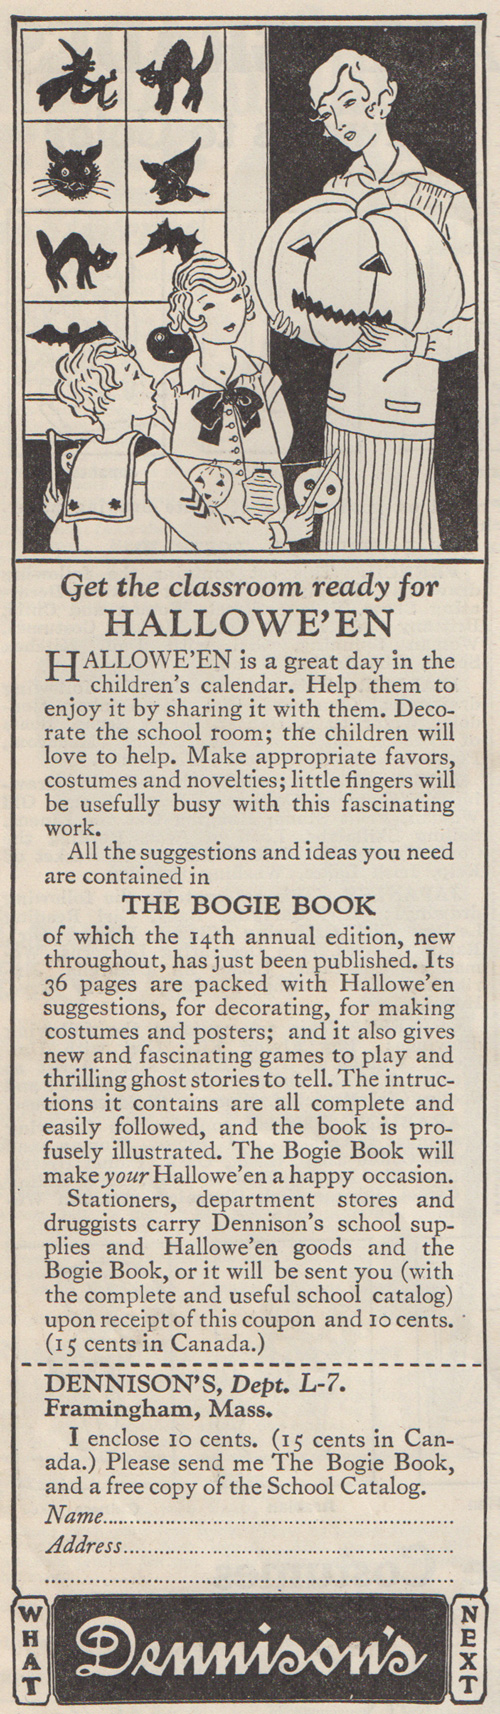 Get the classroom ready for Halloween. The Bogie Book. Advertisement for Dennison's in the October 1926 edition of Normal Instructor and Primary Plans. 